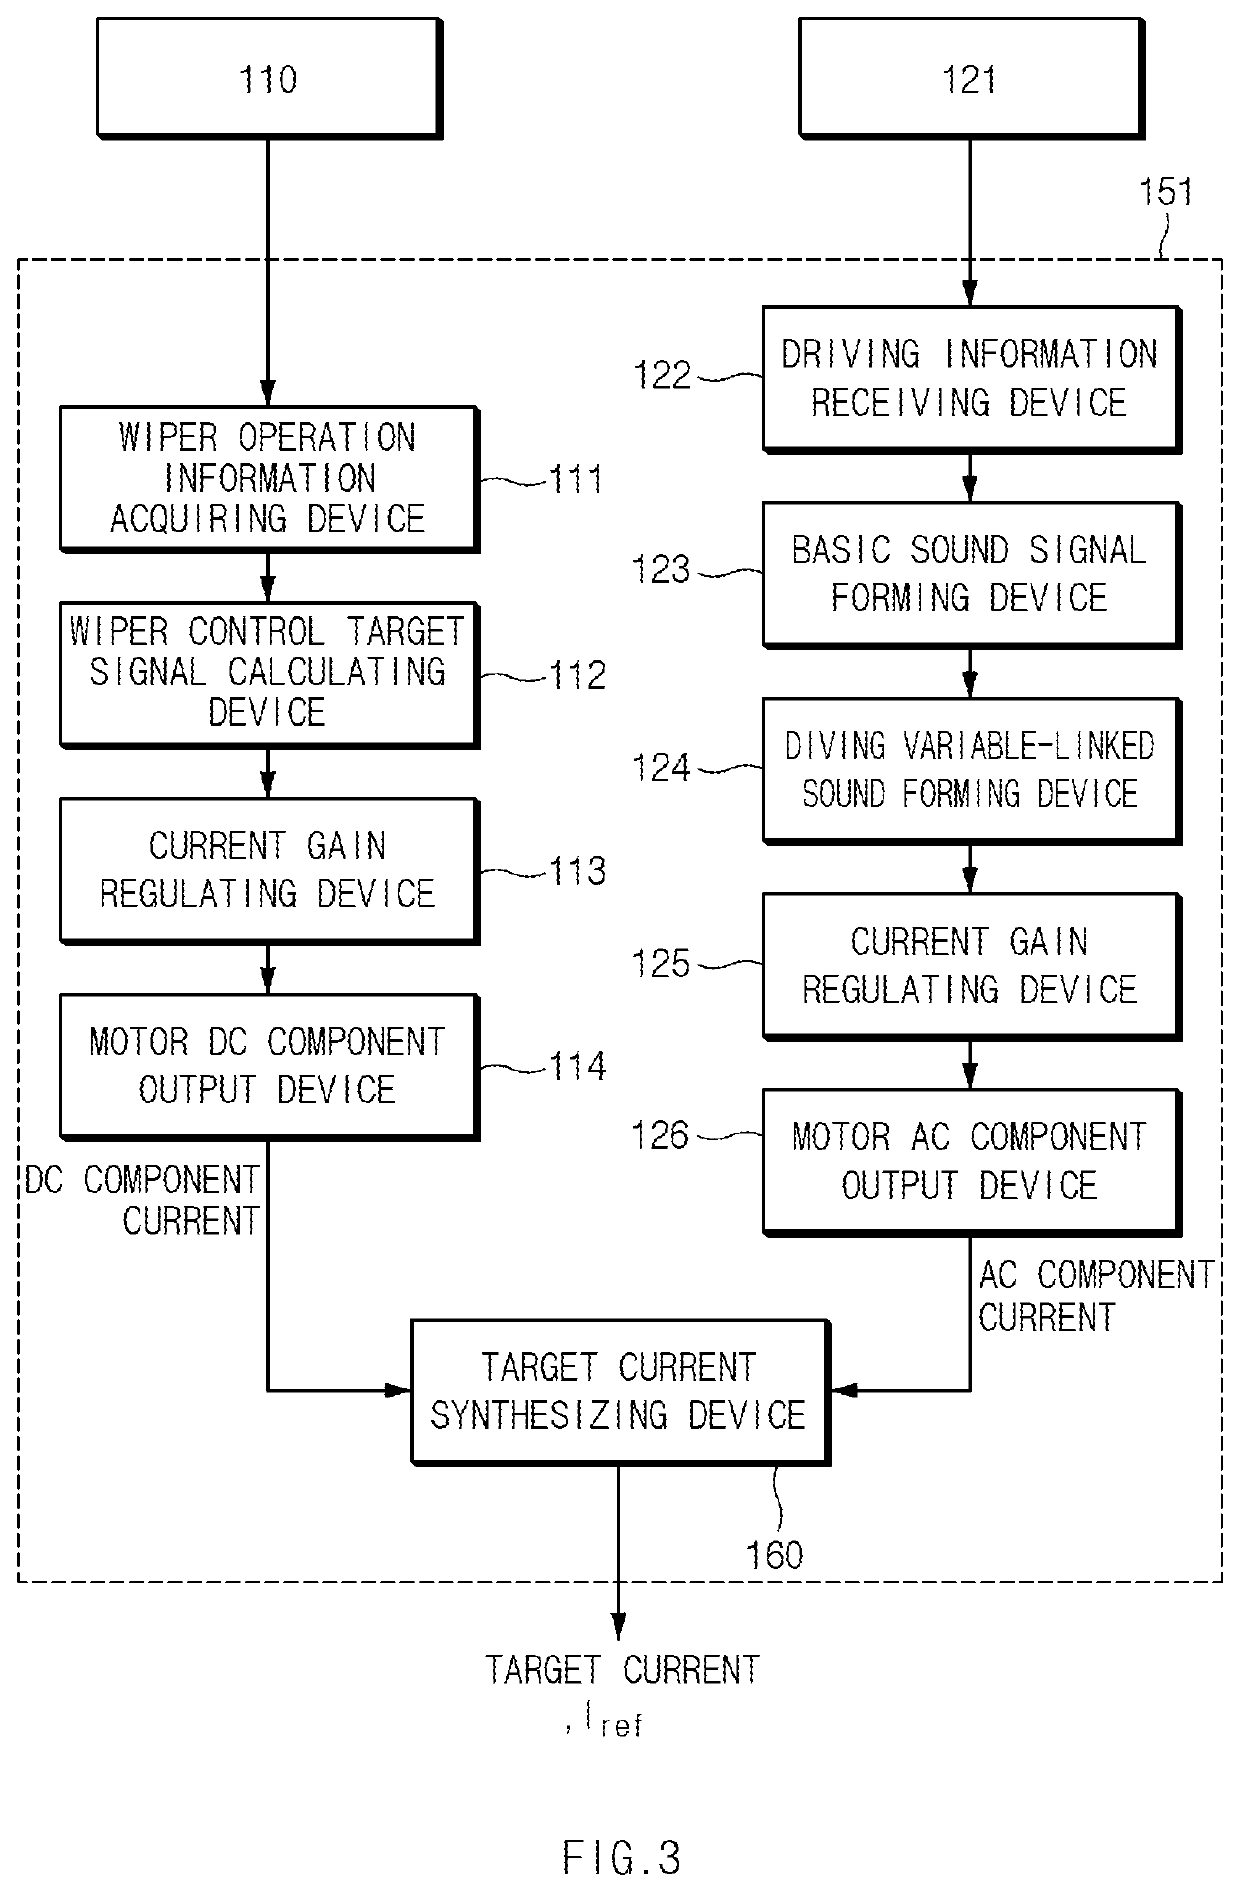 Apparatus and method for generating sound of vehicle